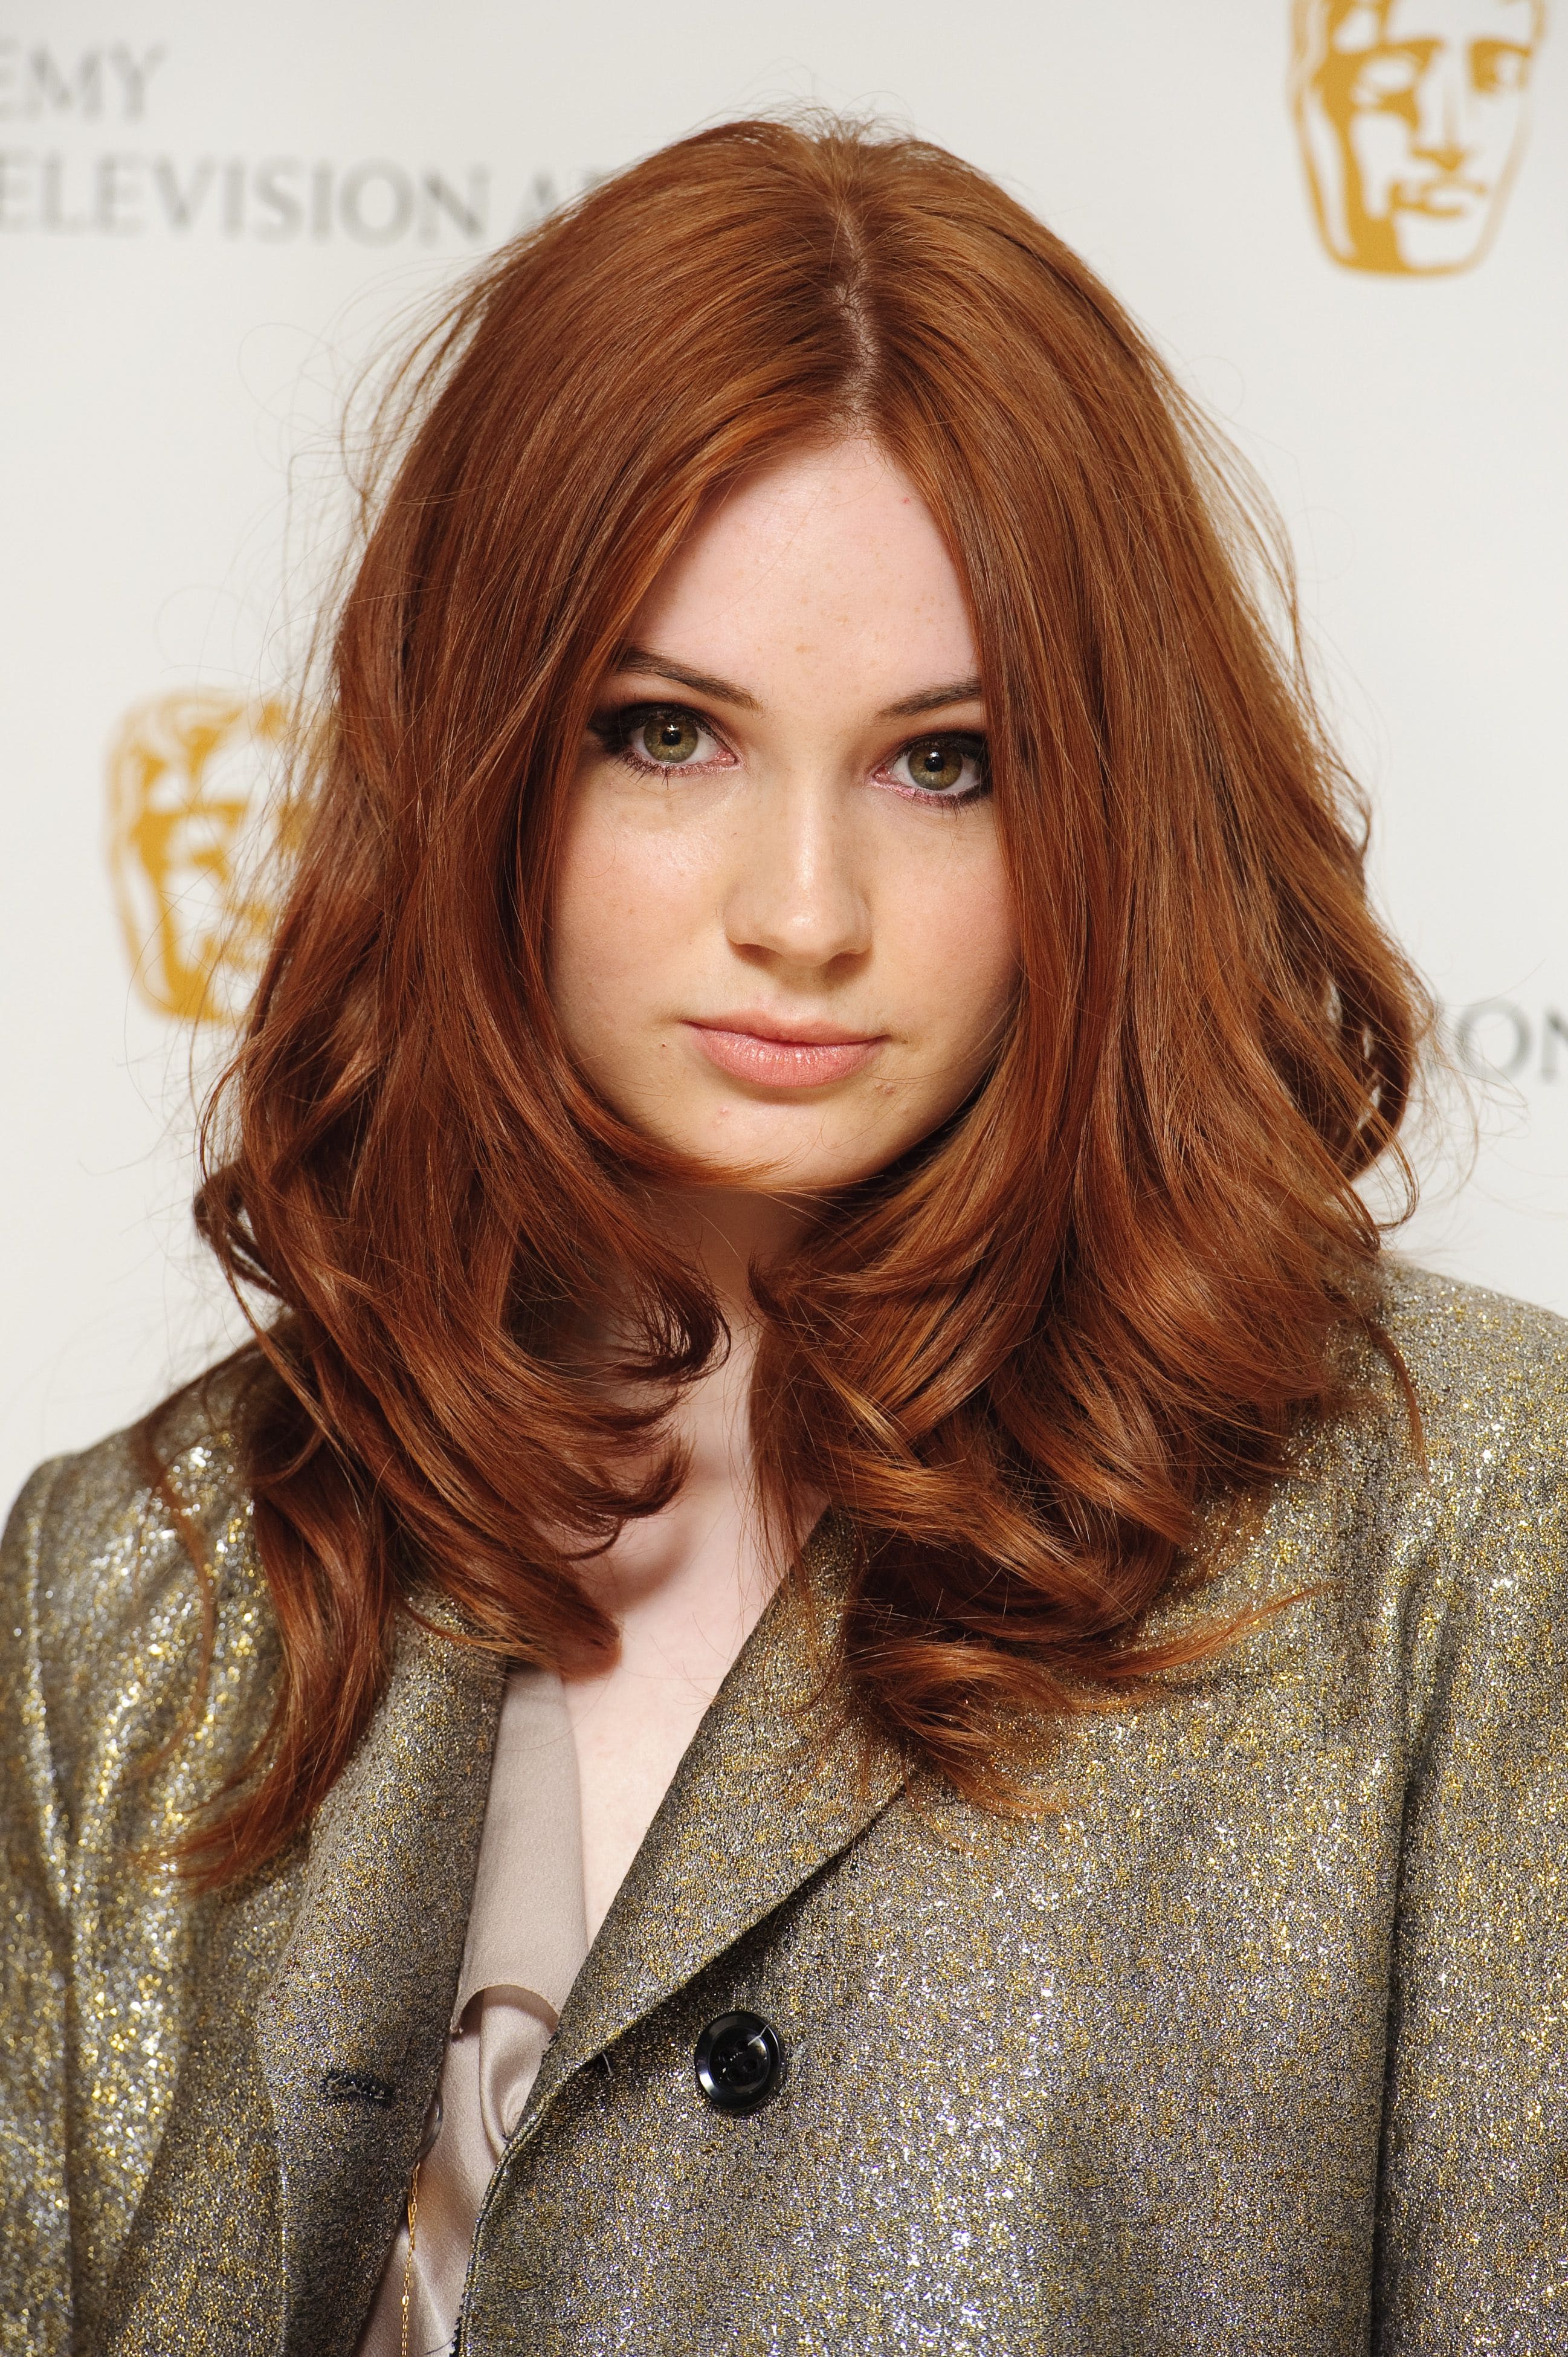 29 Iconic Redheads - Famous Celebs With Red Hair